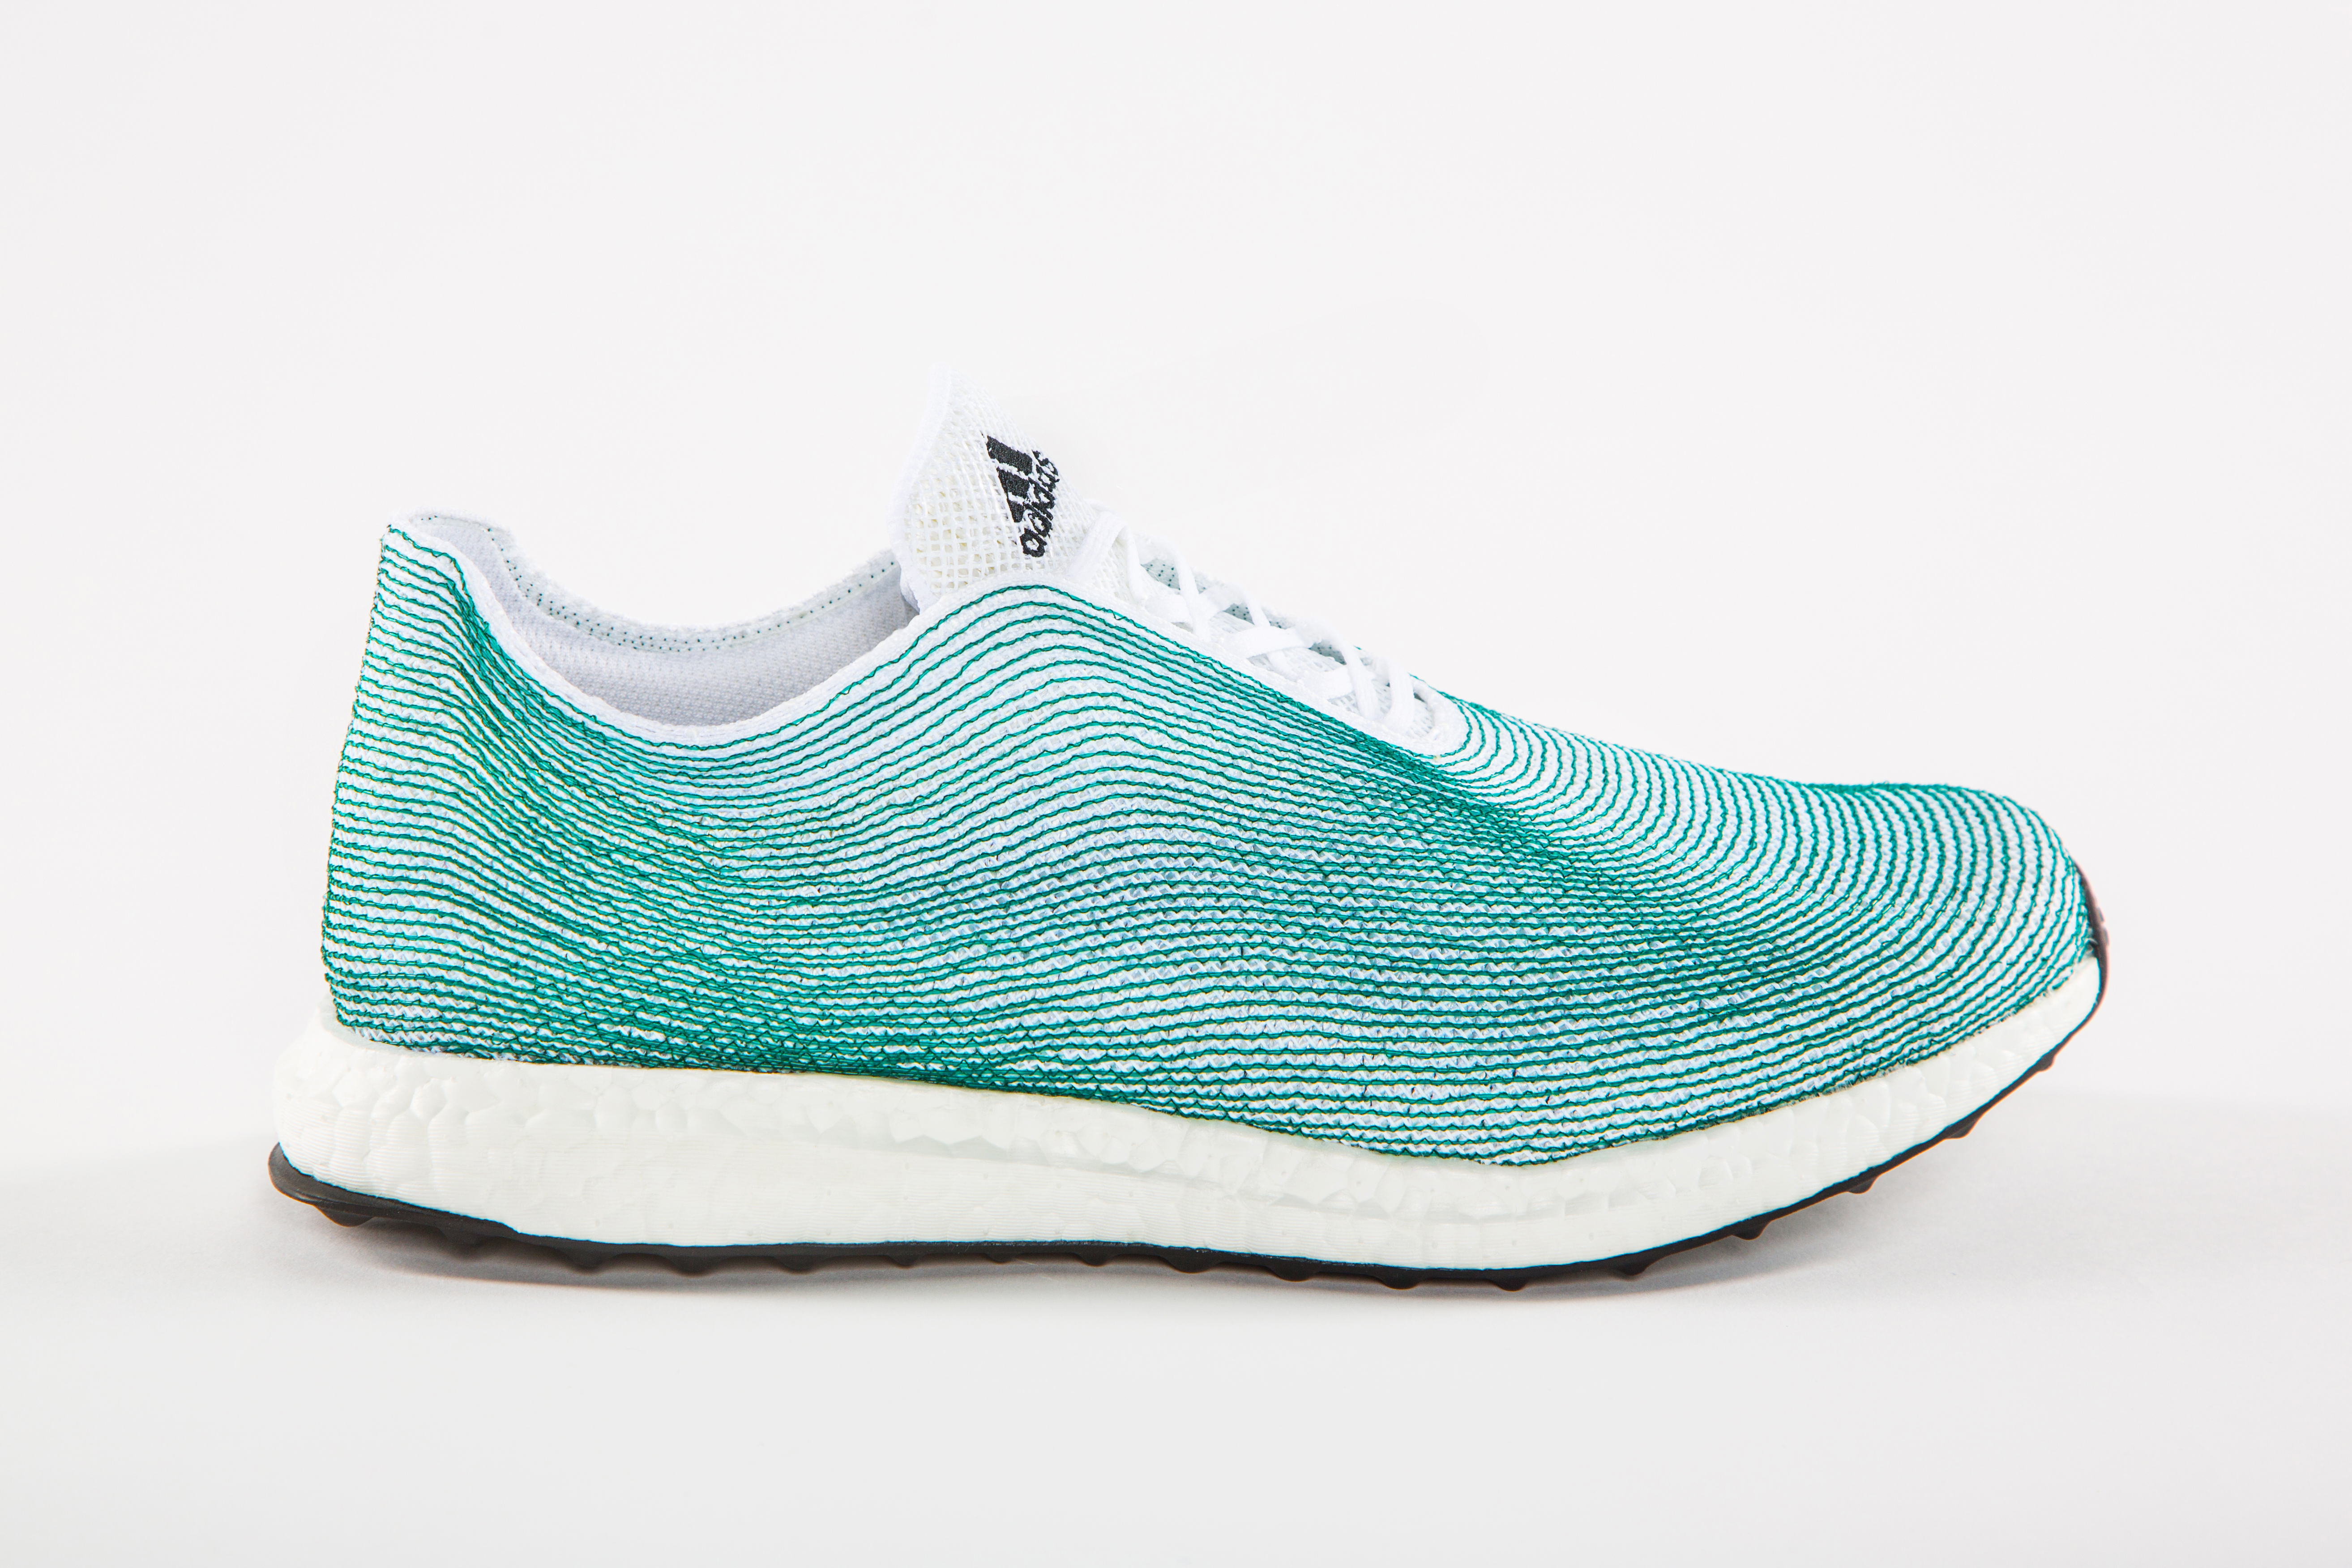 adidas and Parley for the oceans showcase